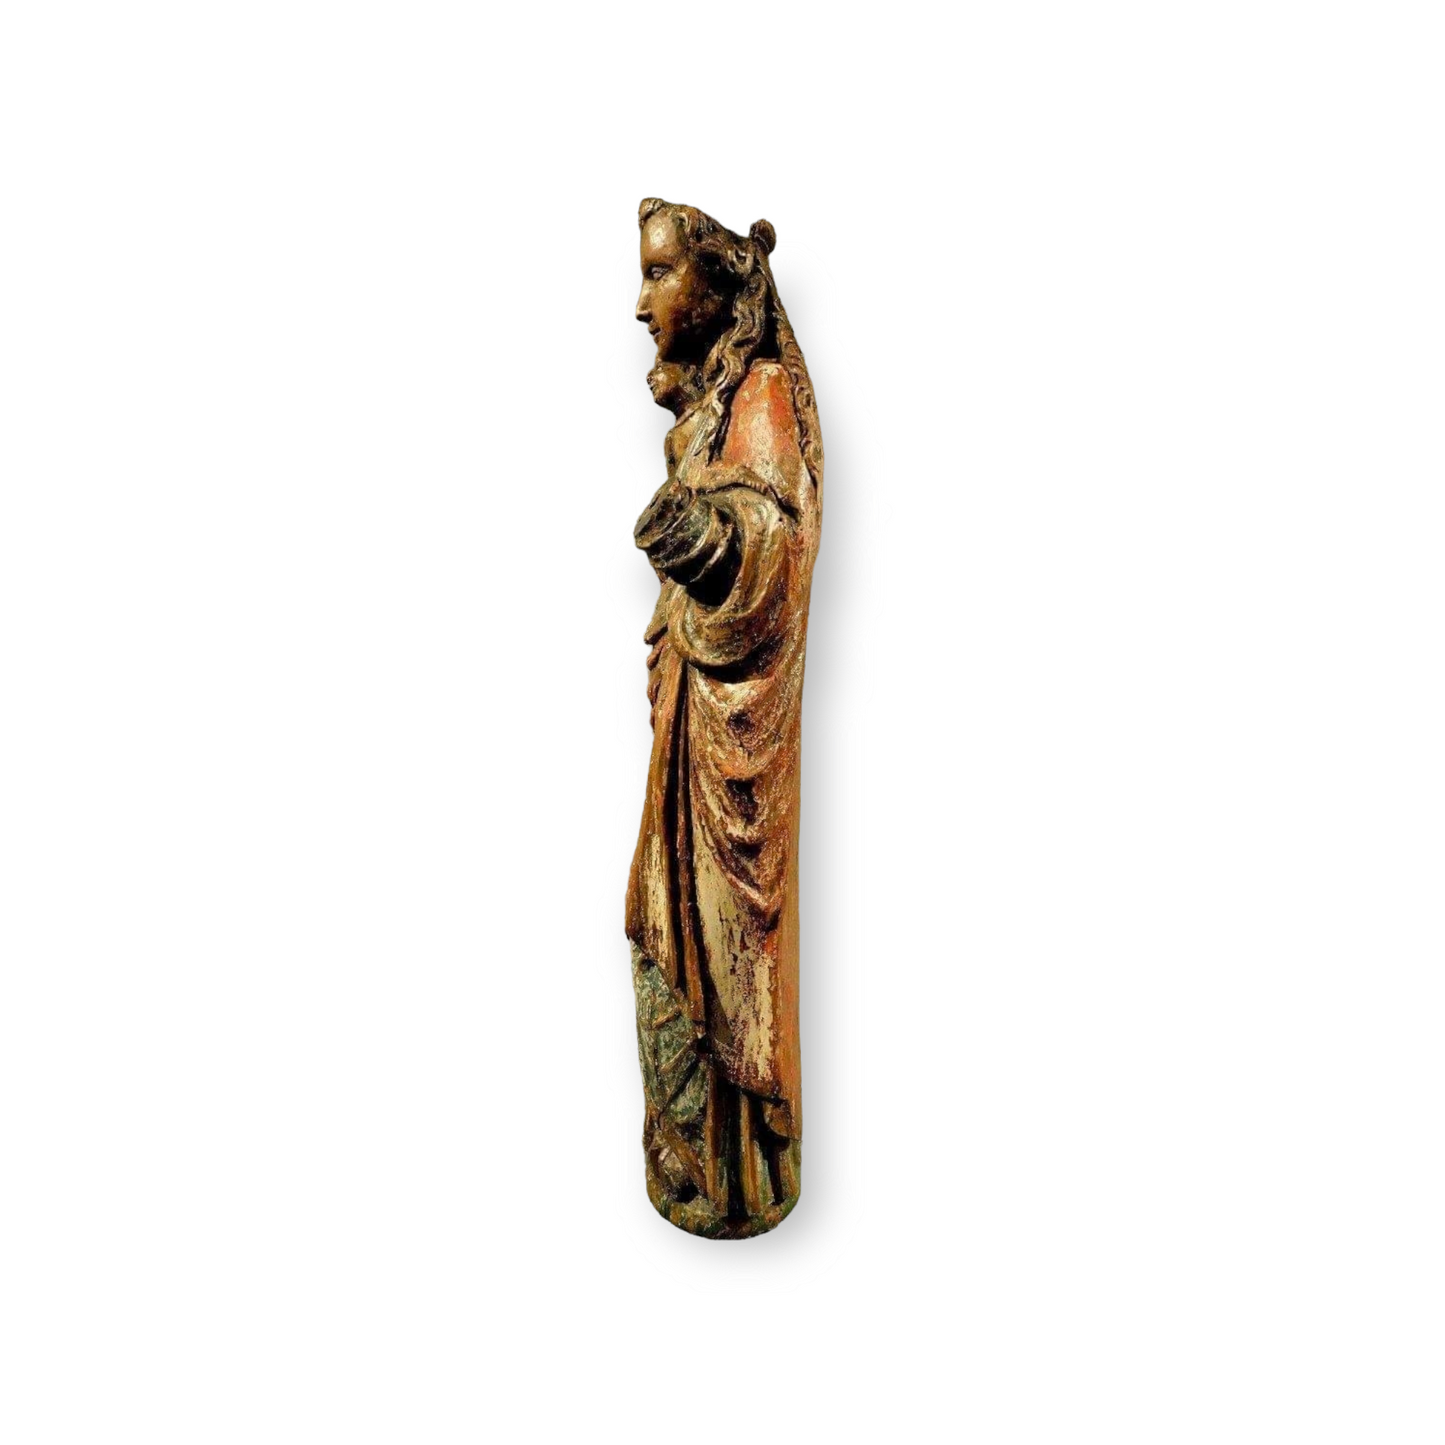 Late 15th Century German Antique Carved Oak Sculpture Of The Virgin Mary And Child